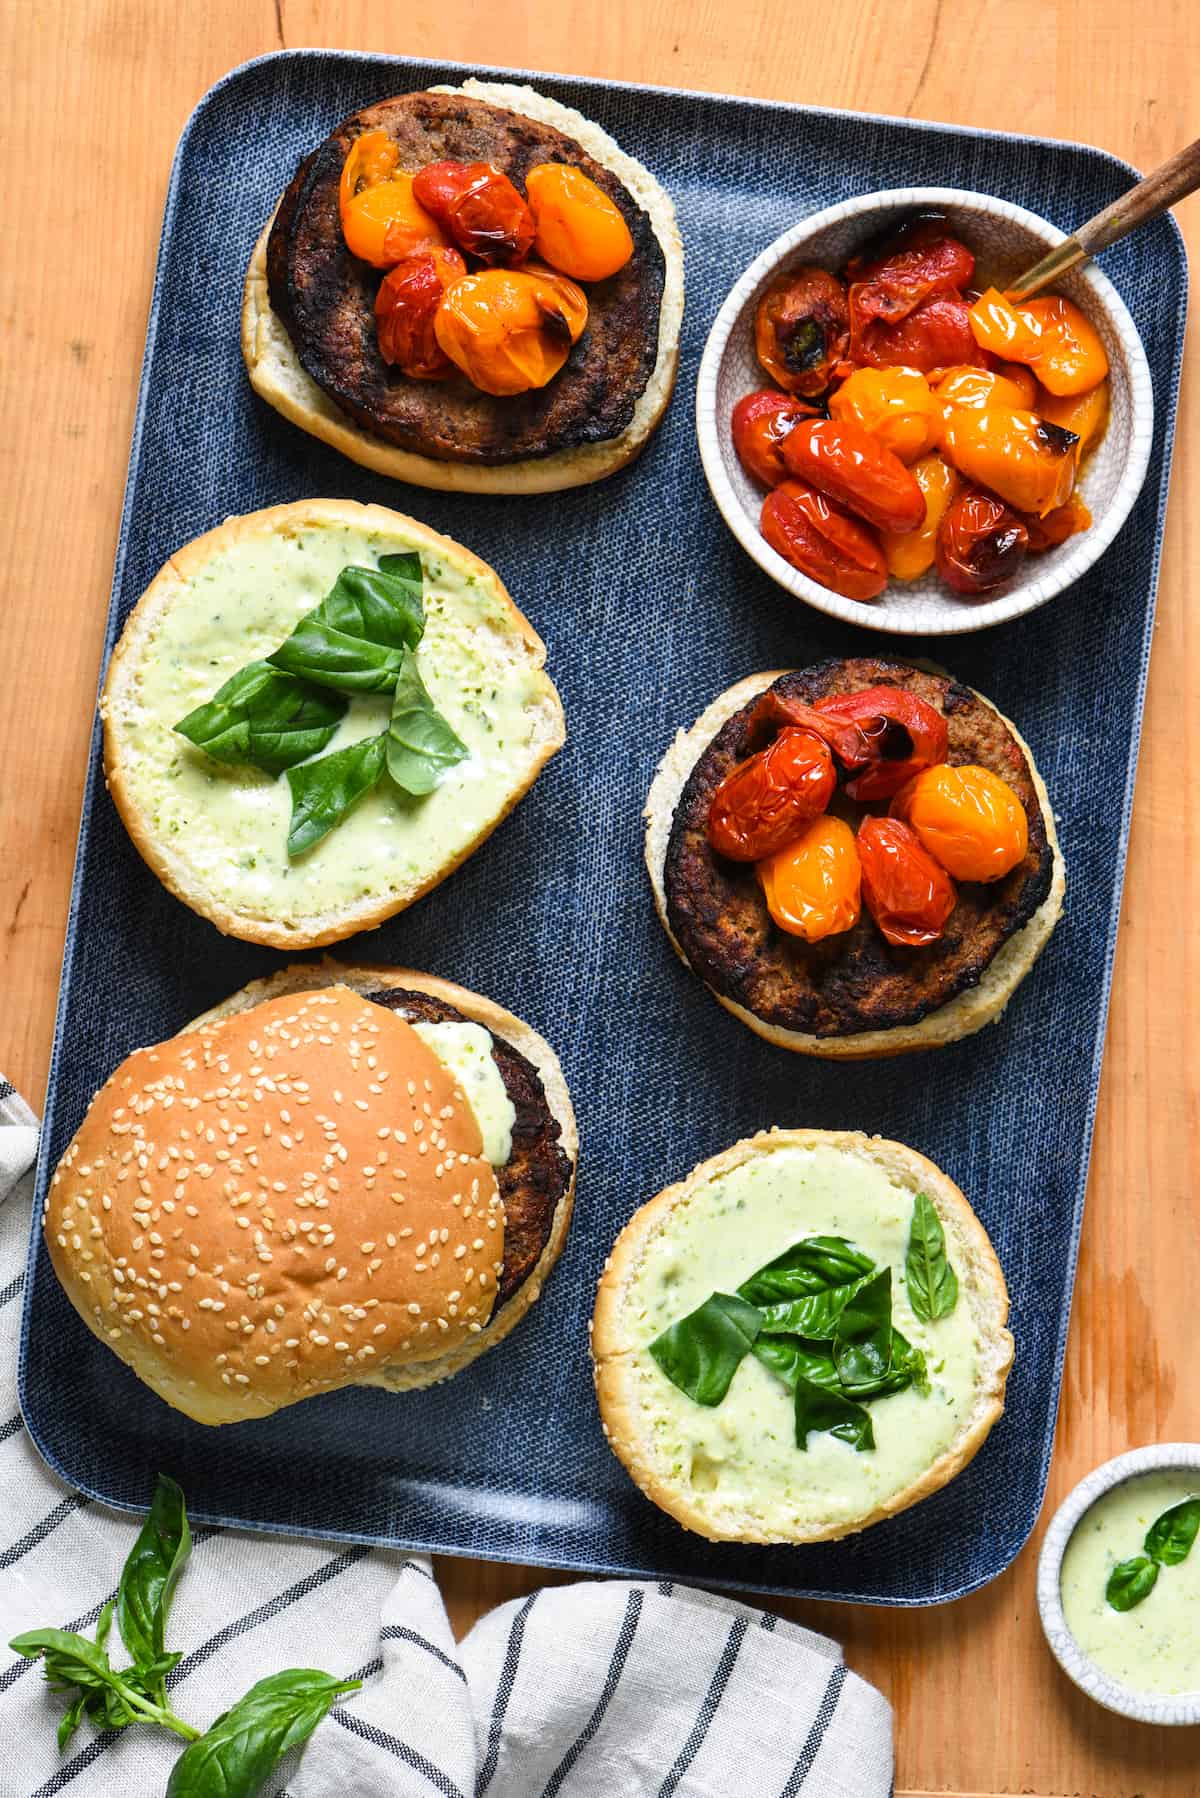 Grill-Roasted Tomato Turkey Burgers with Pesto Ranch - Spruce up burger night with homemade pesto ranch dressing, and tomatoes that are "roasted" on the grill in a foil packet. | foxeslovelemons.com